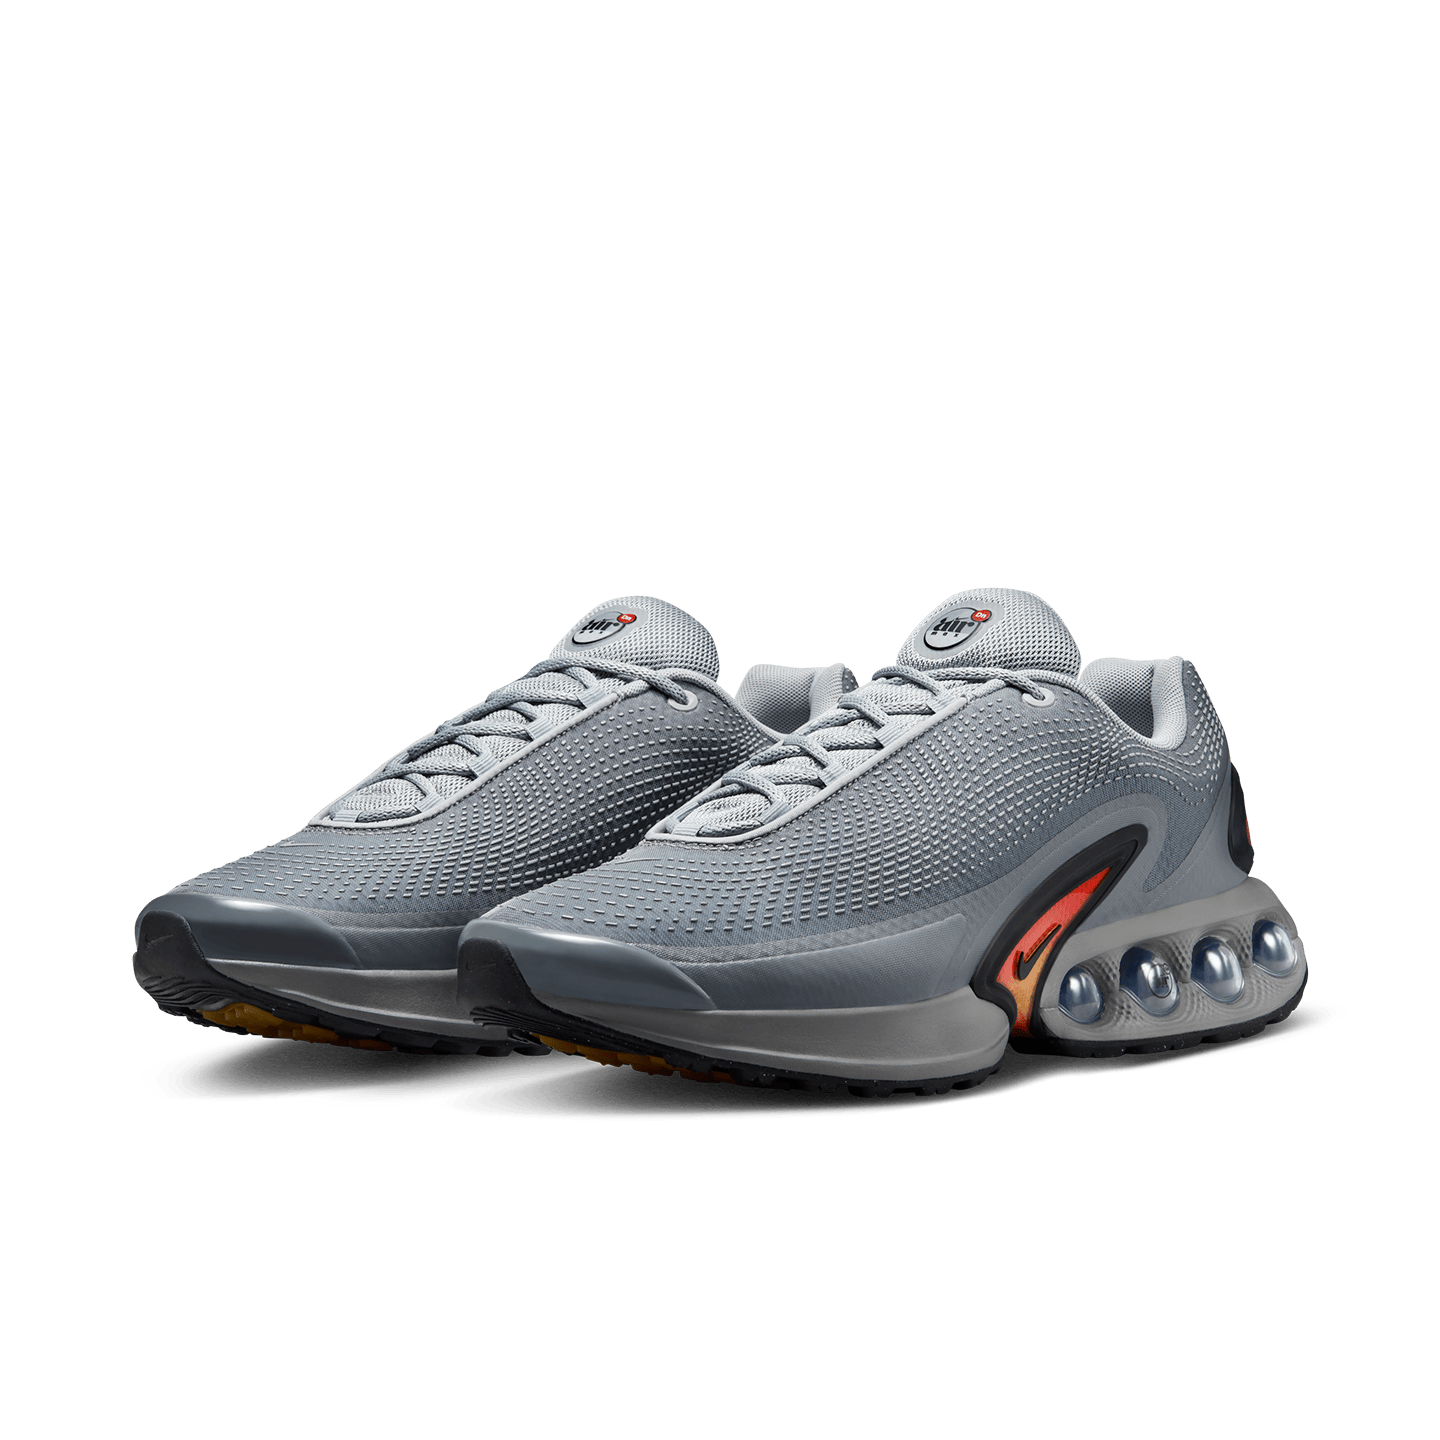 Shoe model in Particle Grey color